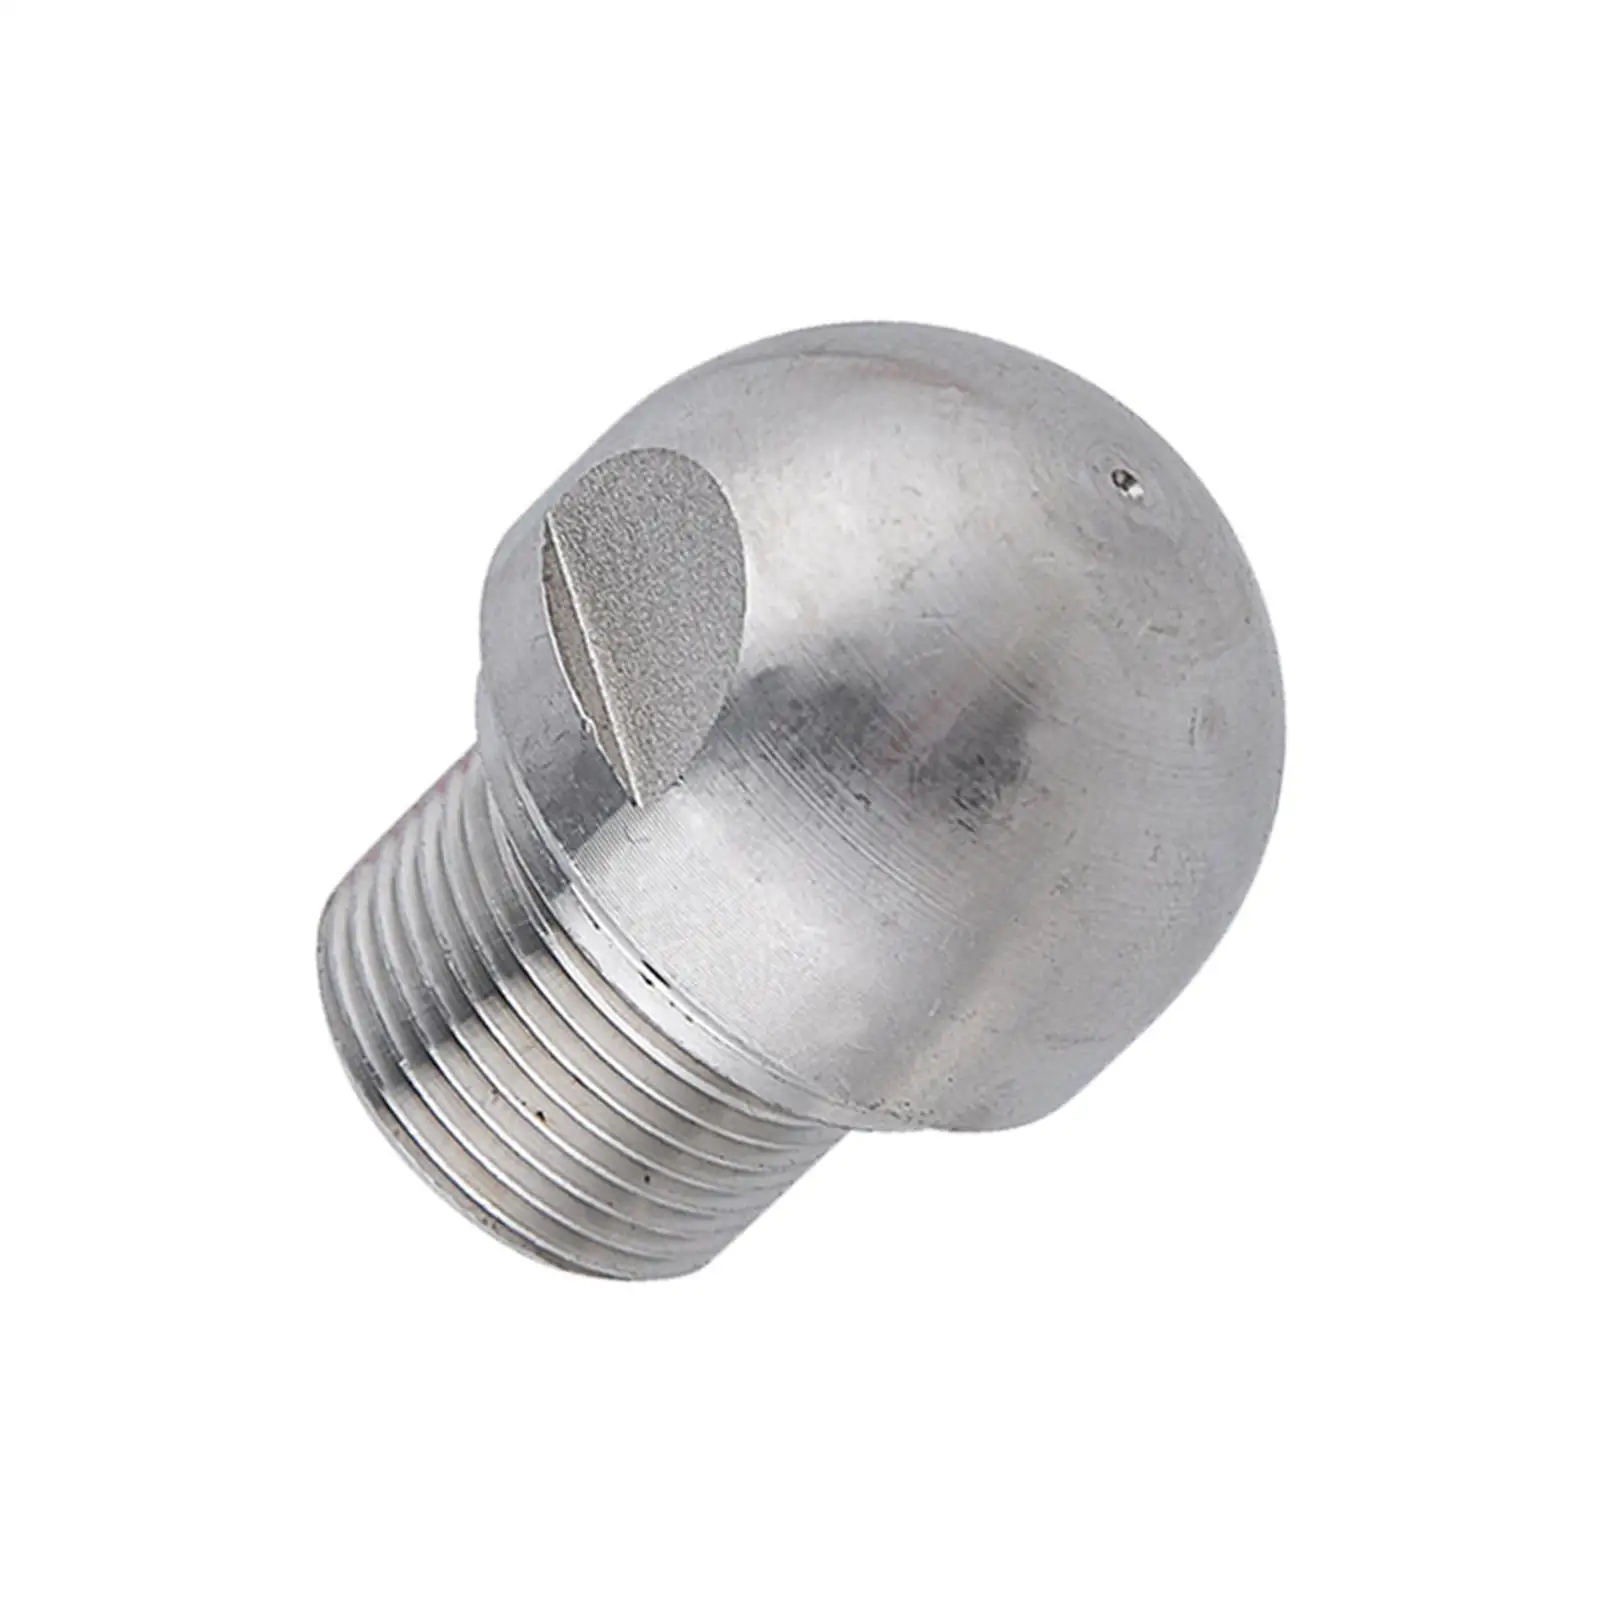 Button Nose Sewer Jetting Nozzle Pressure up to 300Bar 1/4 Thread for Car Home Pipe Cleaning Machine Pressure Washer Accessories